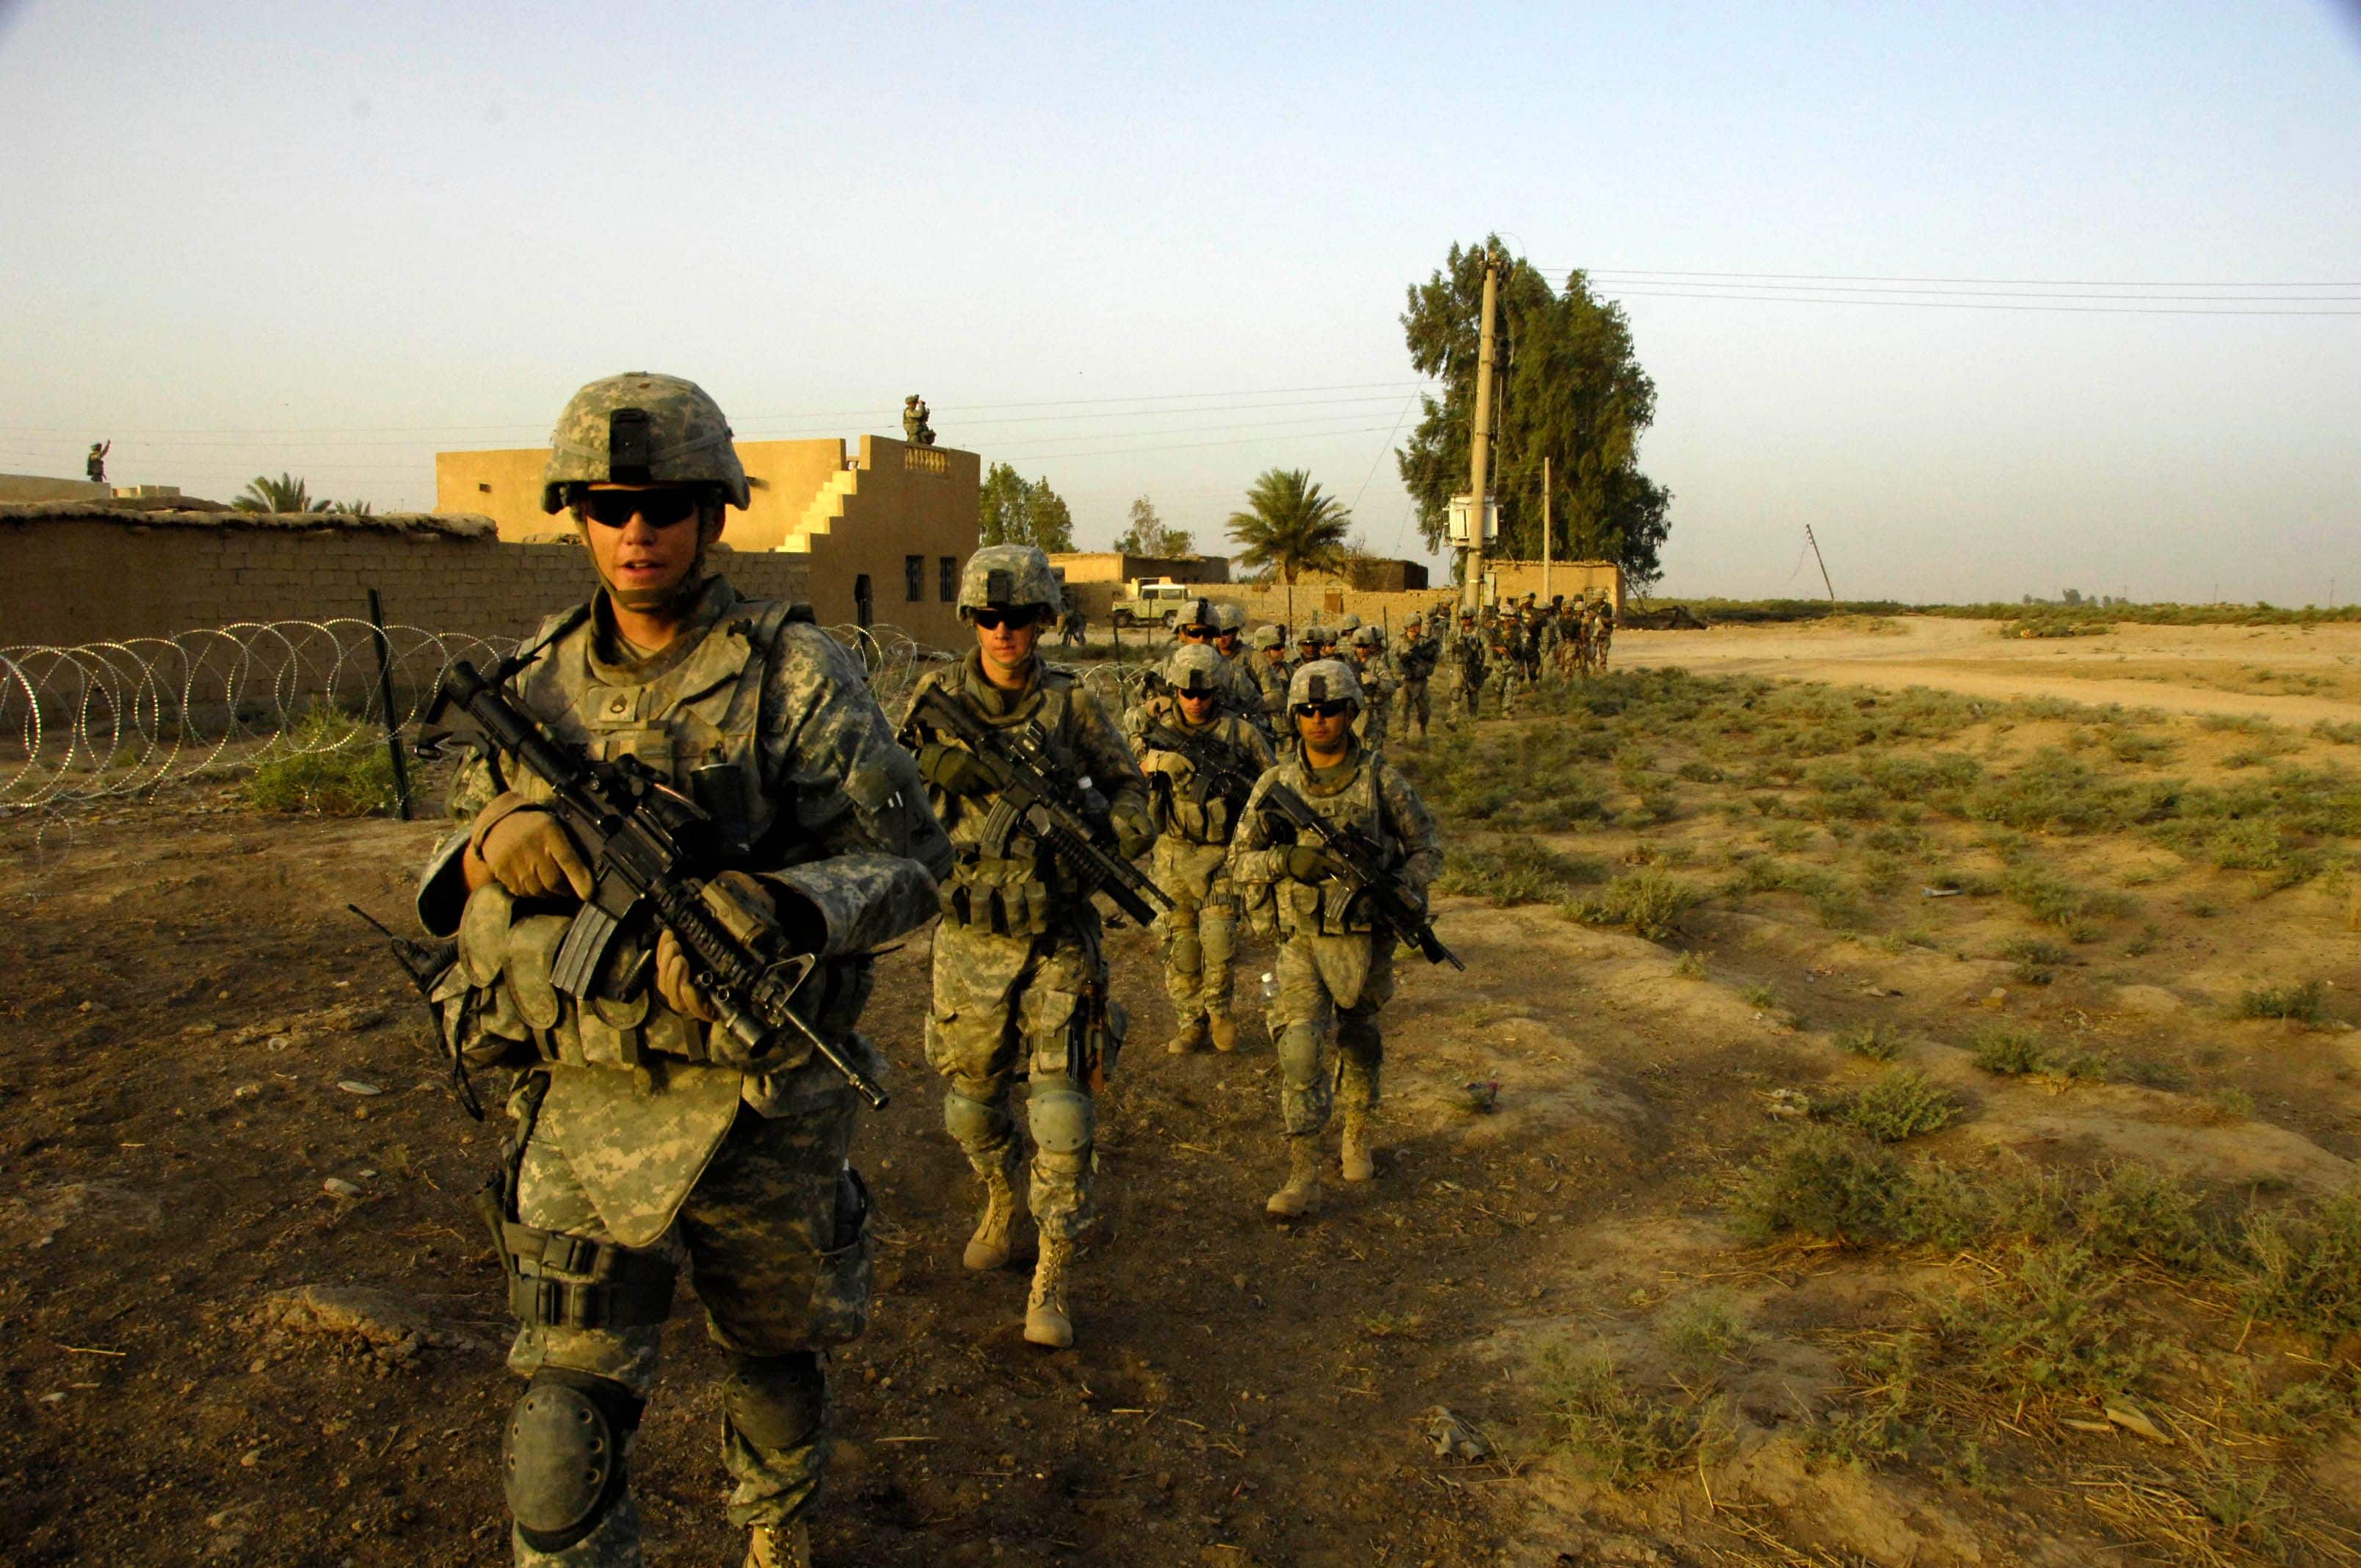 U.S. Army Soldiers from 1st Platoon, G Troop, Task Force 1-35, 2nd Brigade Combat Team move out on patrol in search of weapons cache with an attachment of Iraqi army Soldiers during Operation Iron Pursuit on July 28, 2008 in 7 Nissan village, Diyala province, Iraq.